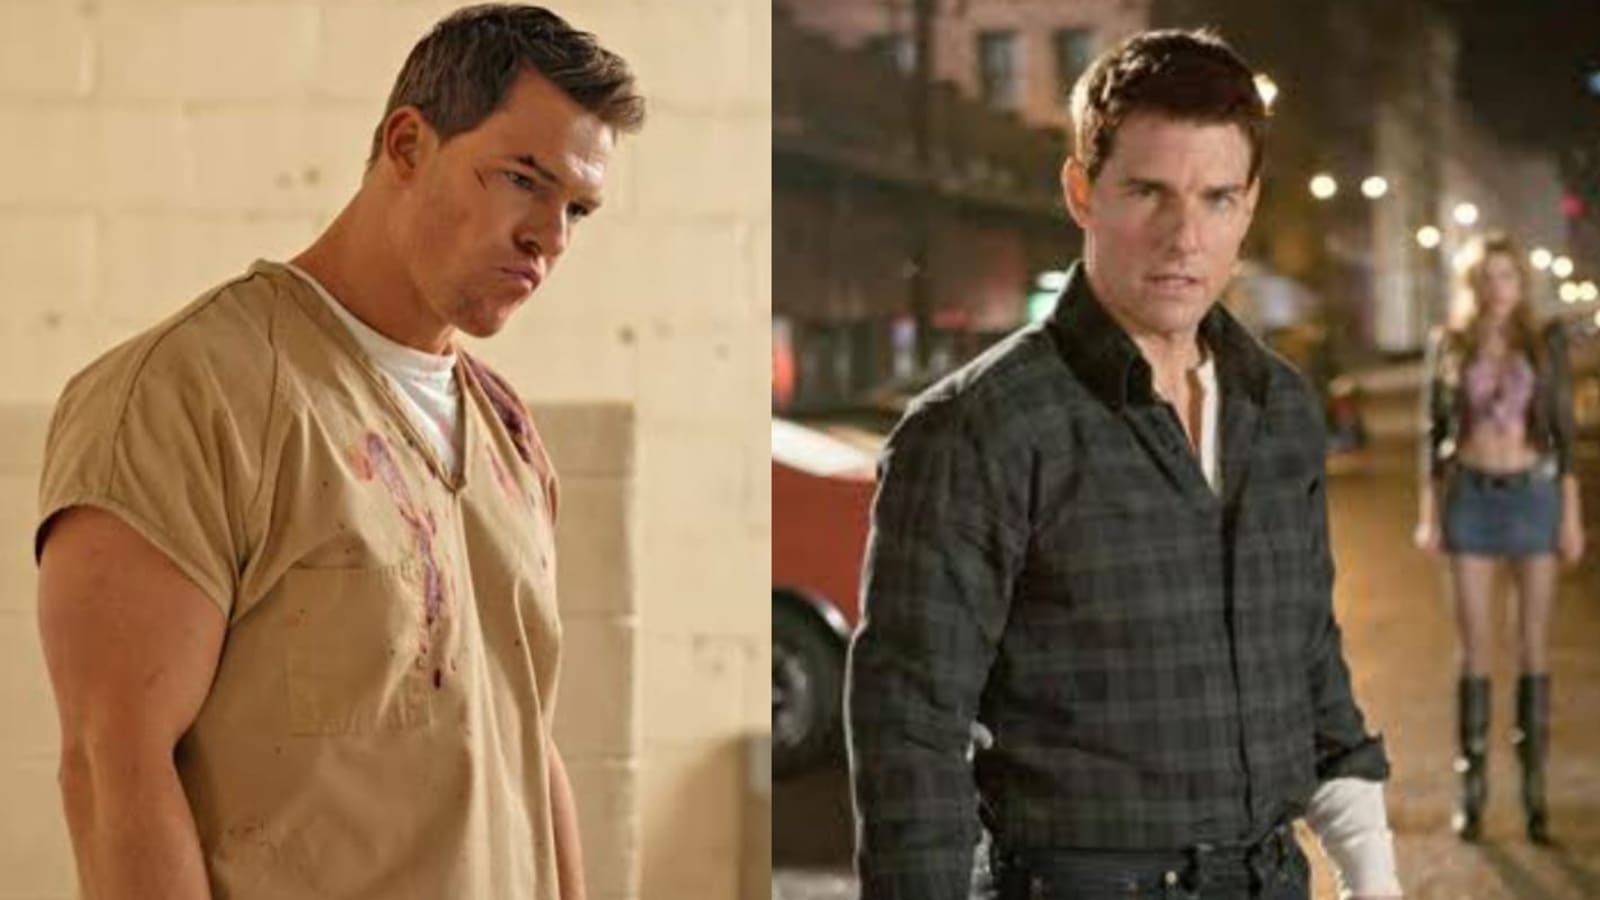 Reacher's Alan Ritchson talks about replacing Tom Cruise: 'He's a